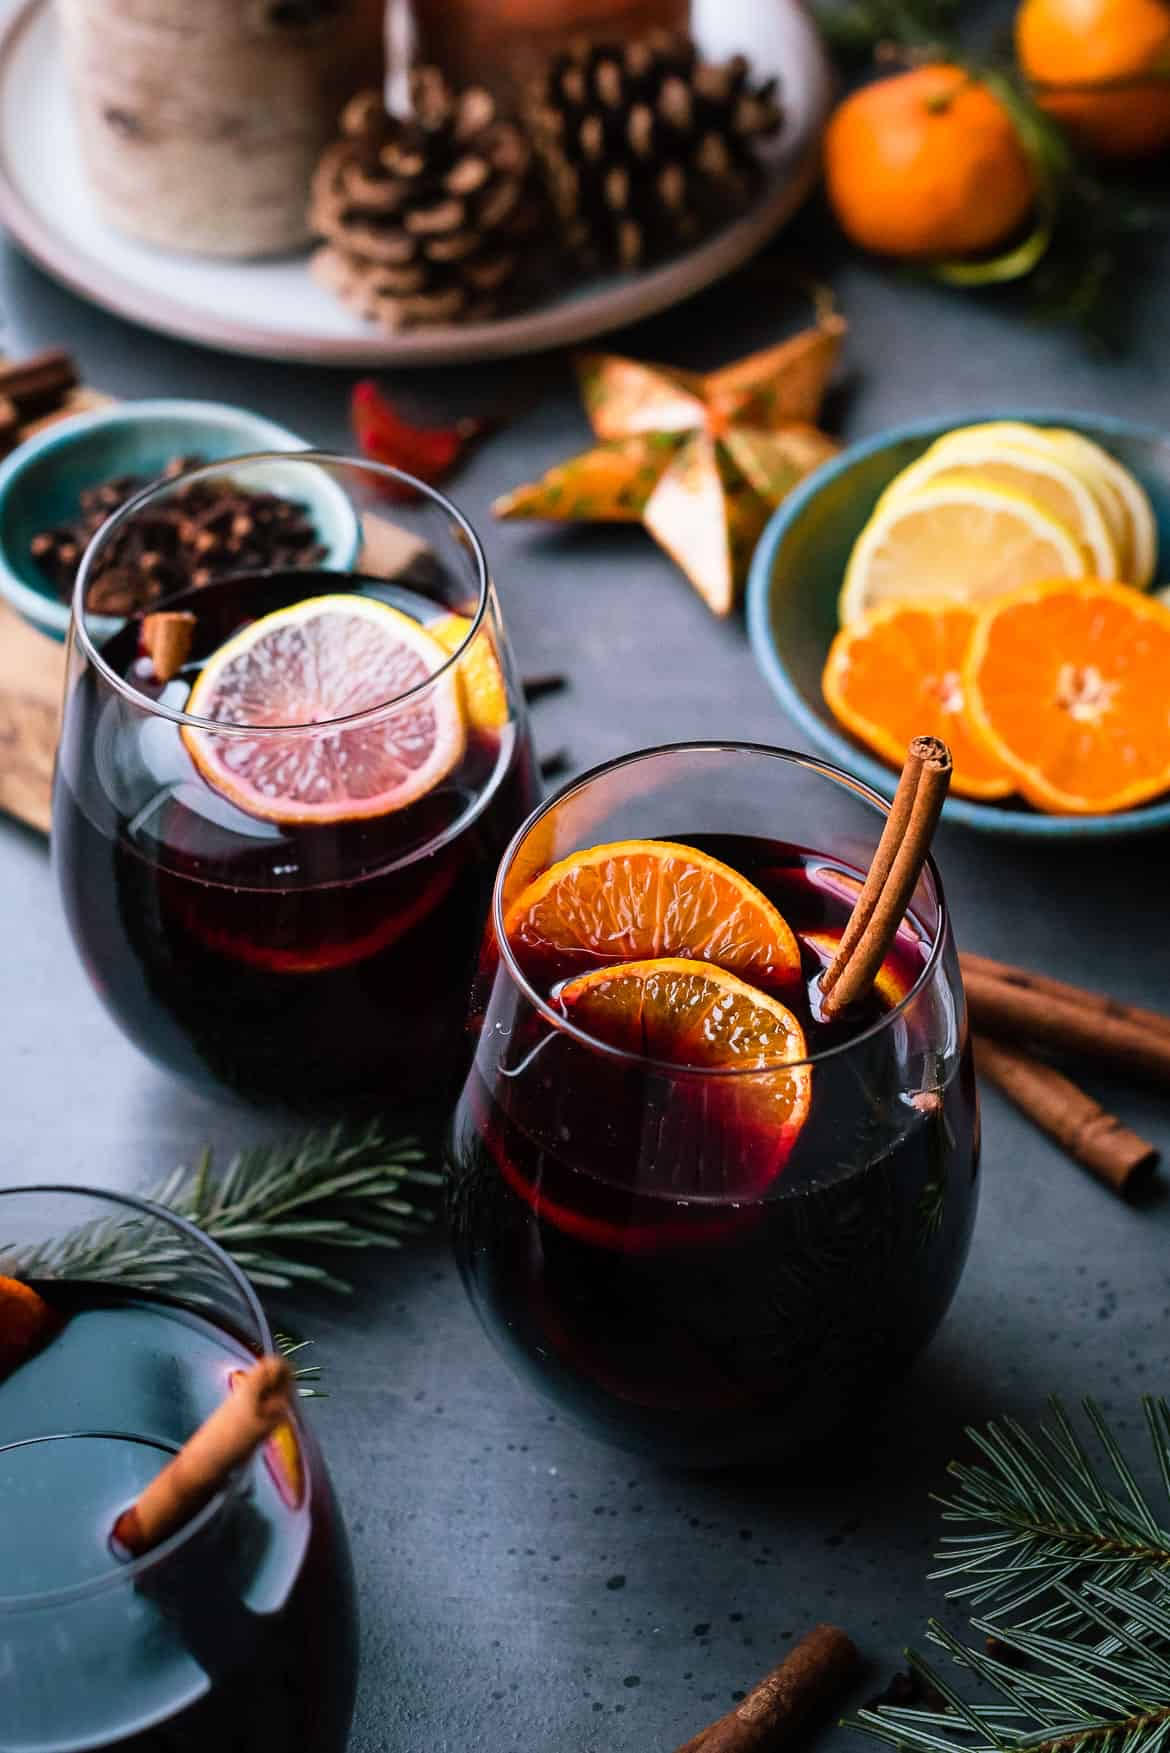 Mulled Wine – The perfect winter drink